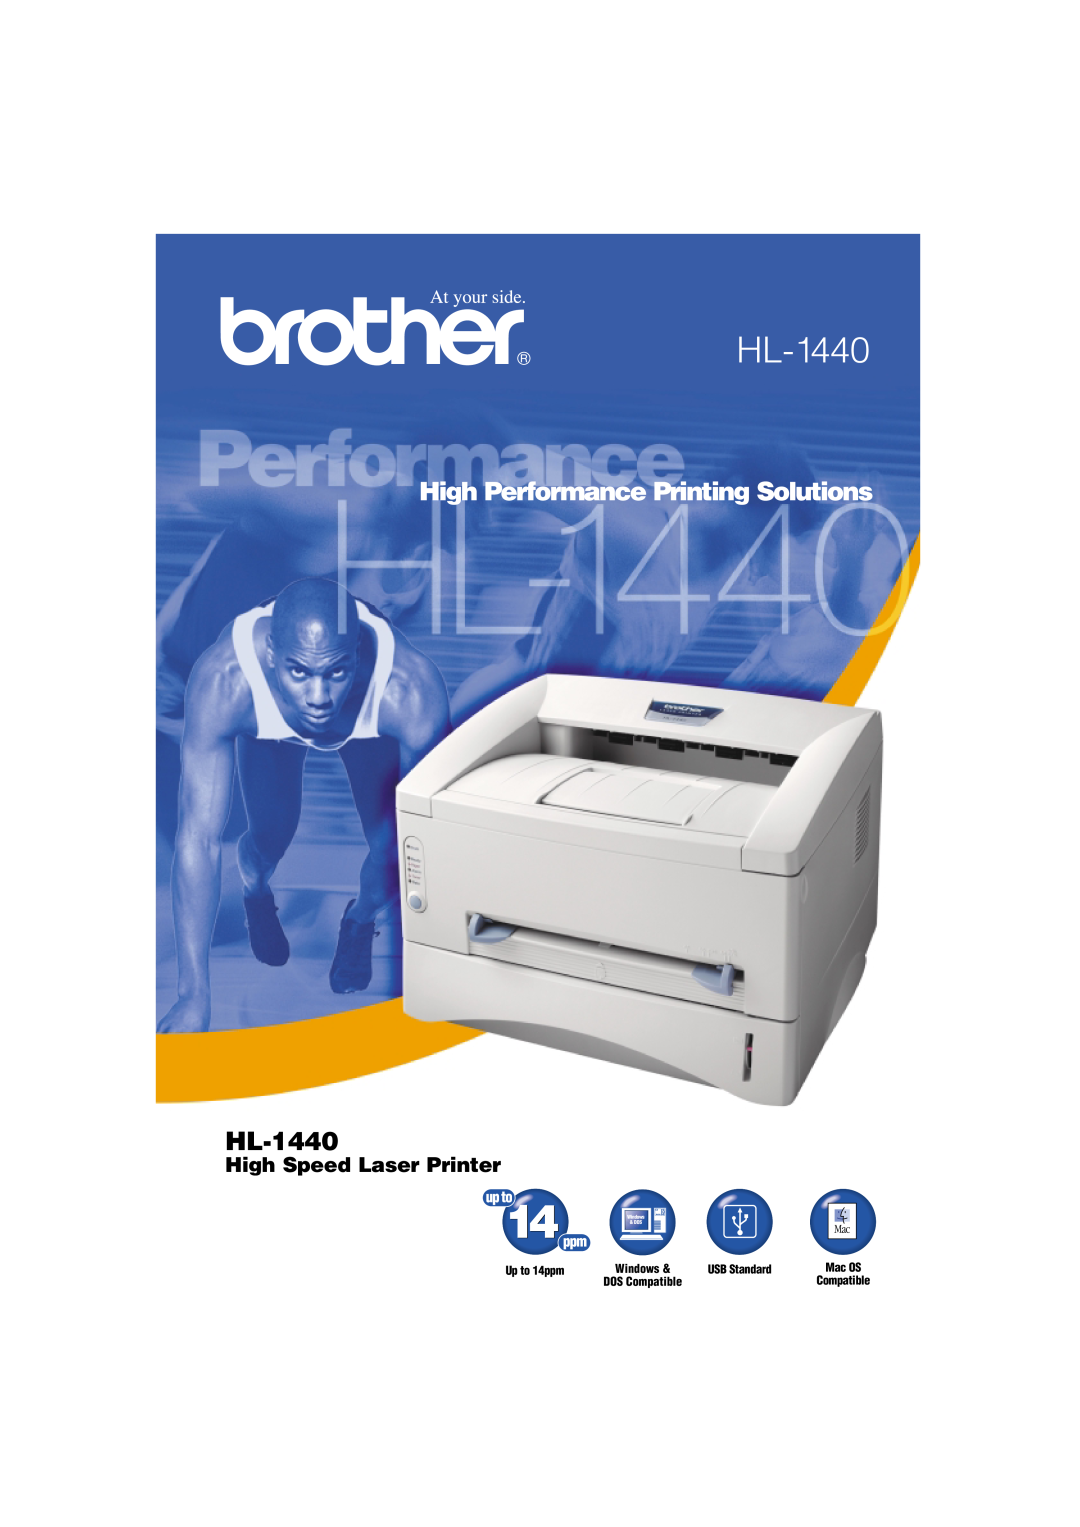 Brother HL-1440 manual Up to 14ppm, Windows DOS Compatible, USB Standard, High Performance Printing Solutions, Mac OS 